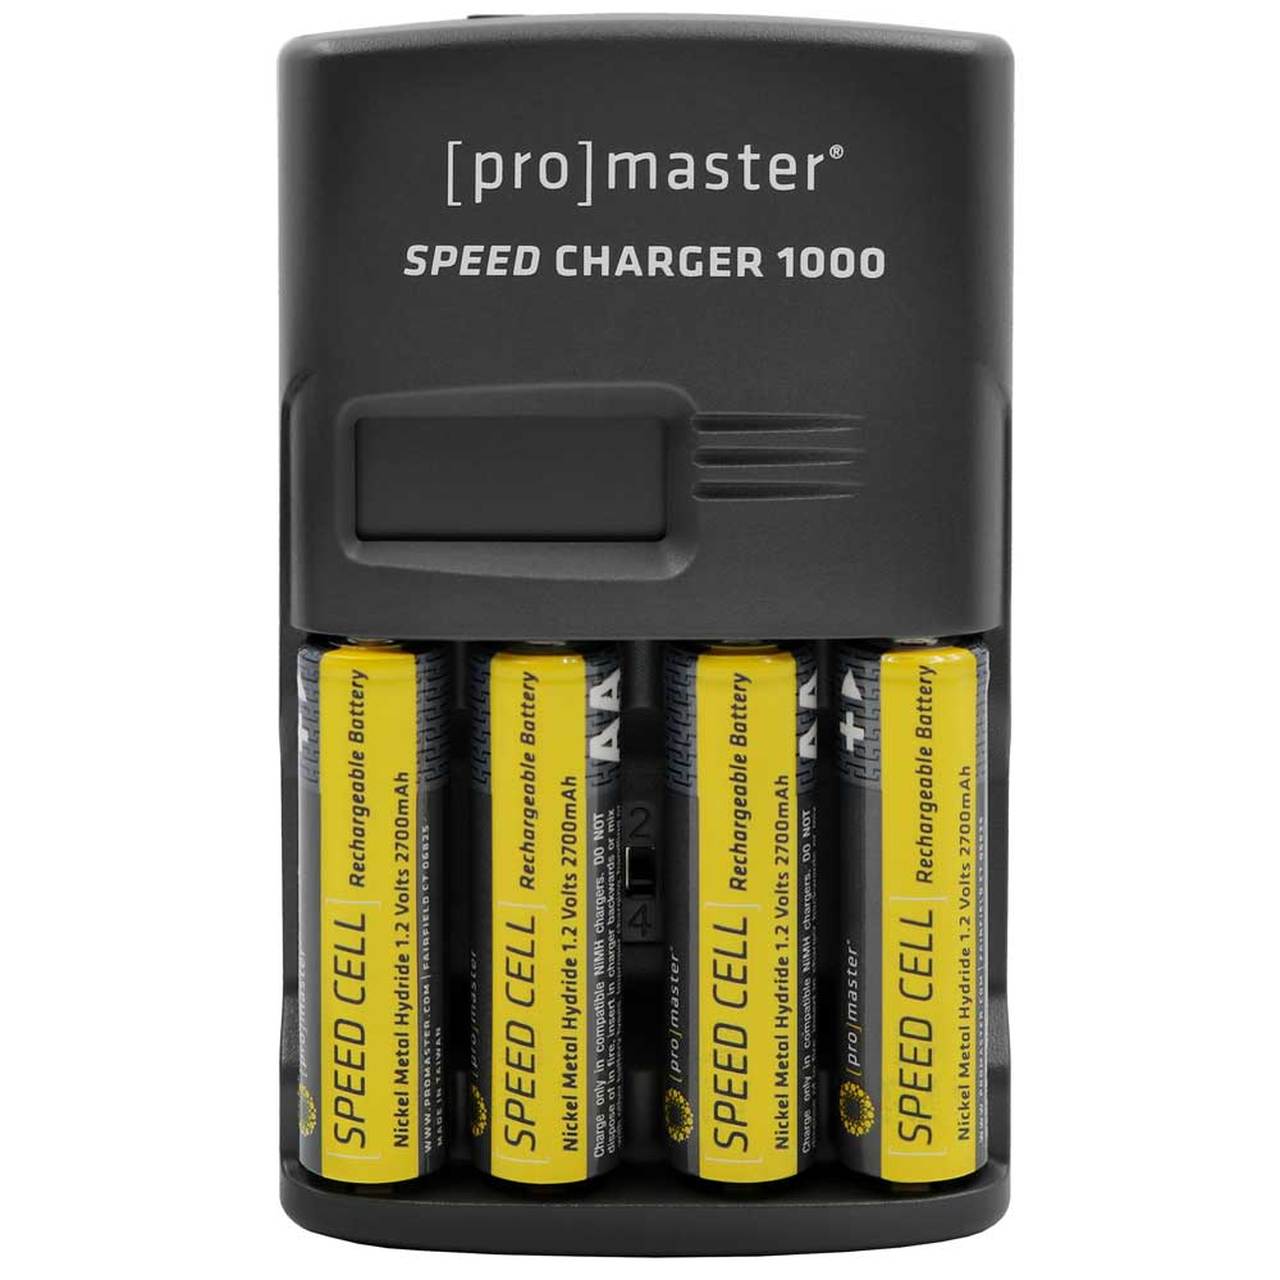 Promaster 1980 Speed Charger 1000 AANiMH Kit with 4 Batteries